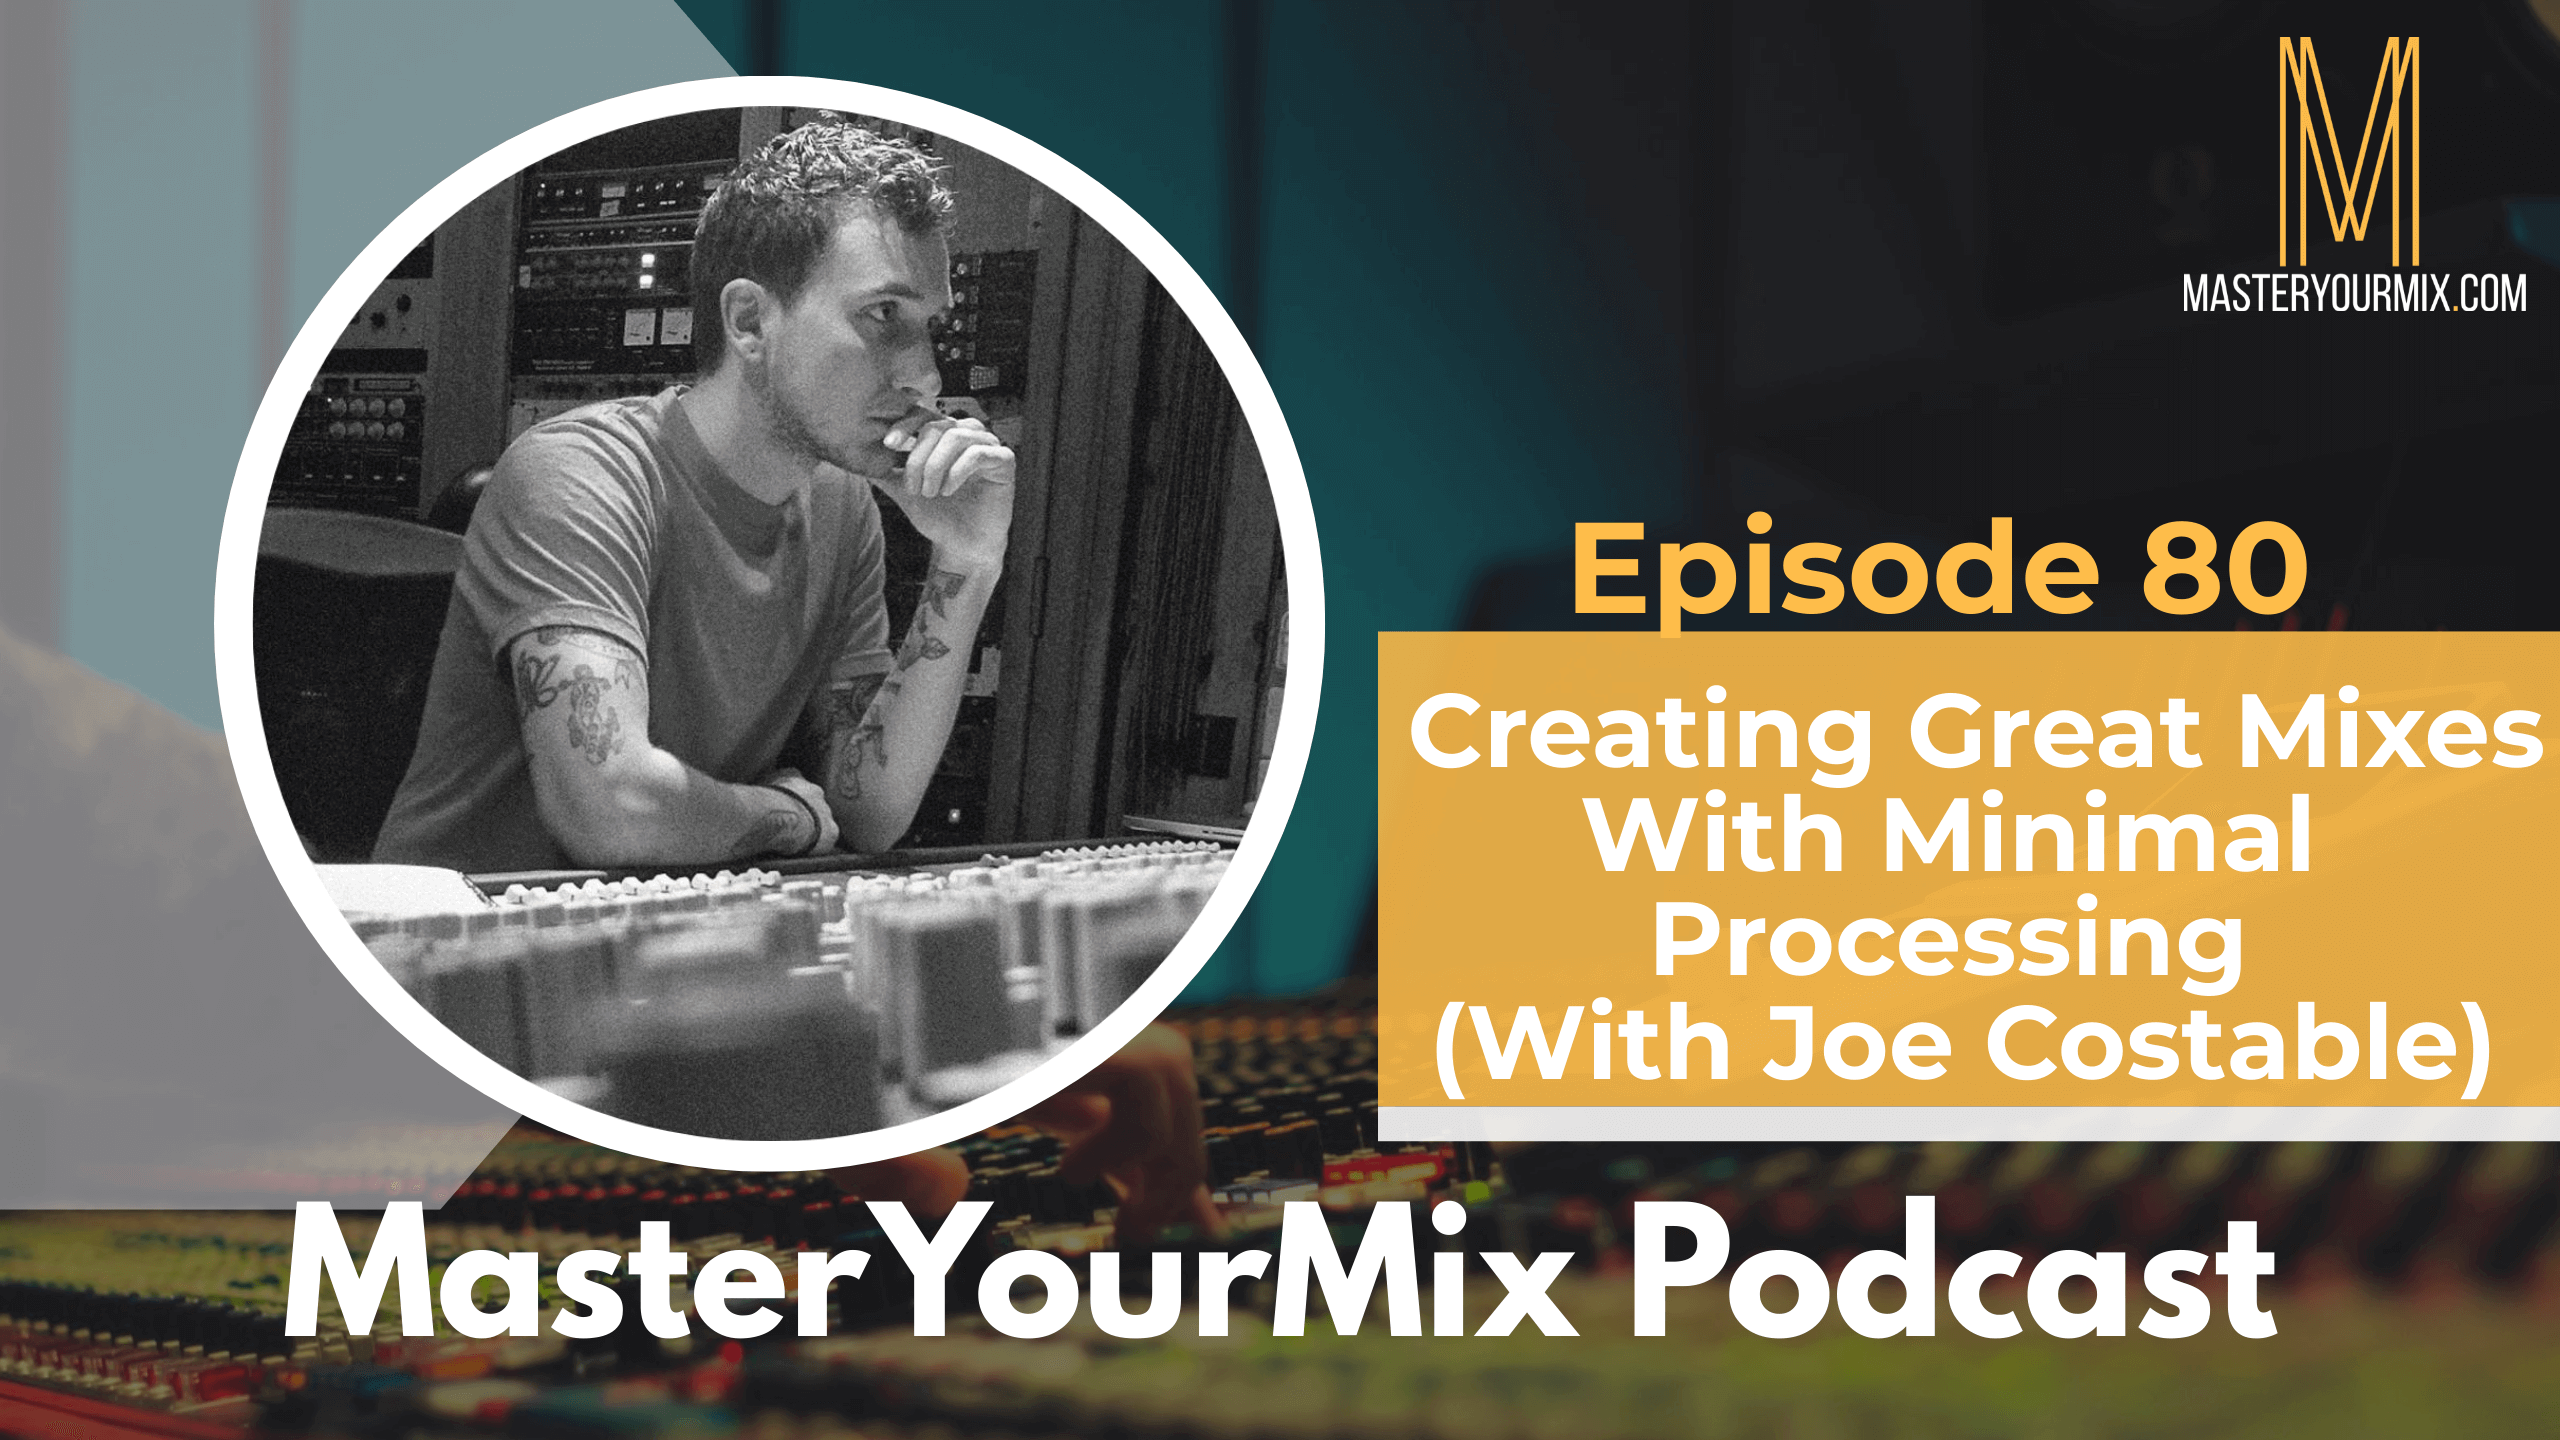 master your mix podcast, ep 80 joe costable